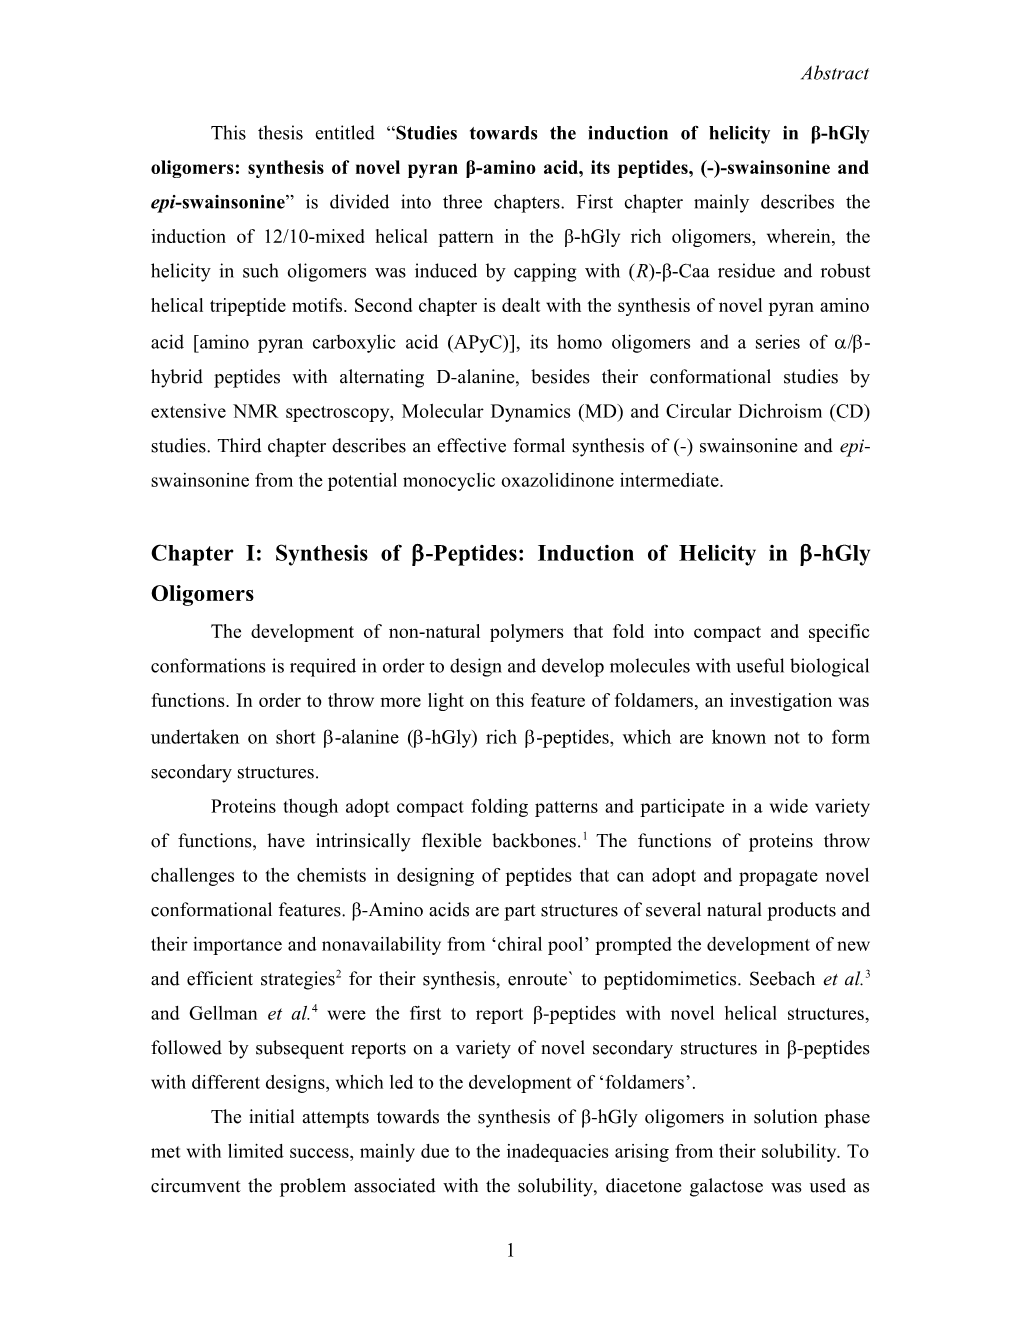 This Thesis Entitled Glycosyl Mimics: Synthesis of Novel Linear and Cyclic Carbo-Β-Peptides